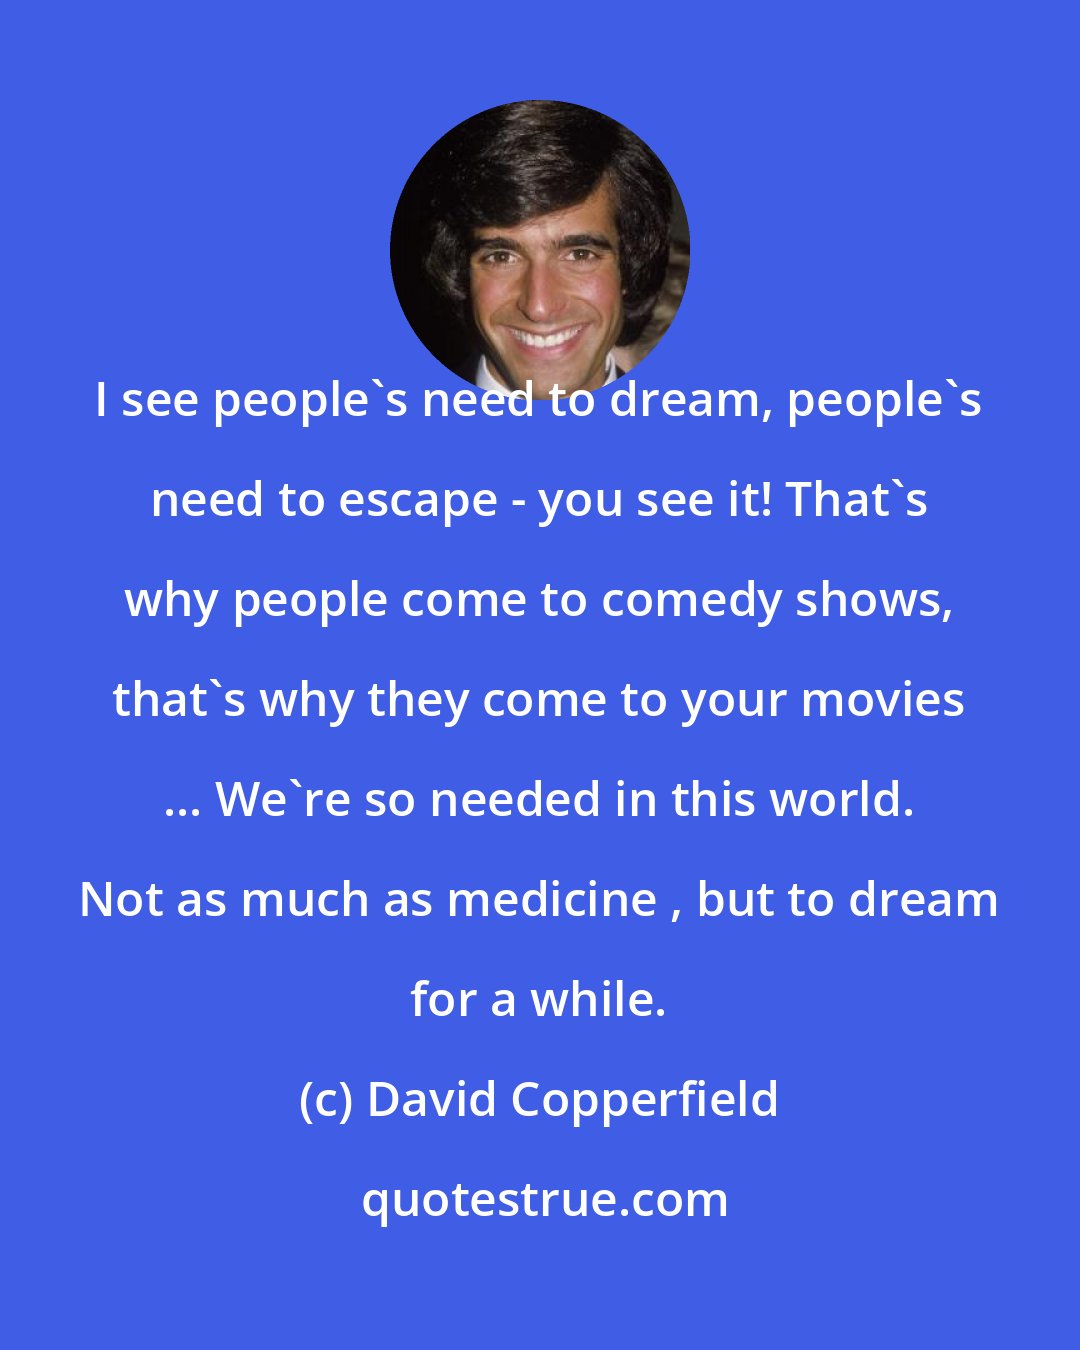 David Copperfield: I see people's need to dream, people's need to escape - you see it! That's why people come to comedy shows, that's why they come to your movies ... We're so needed in this world. Not as much as medicine , but to dream for a while.